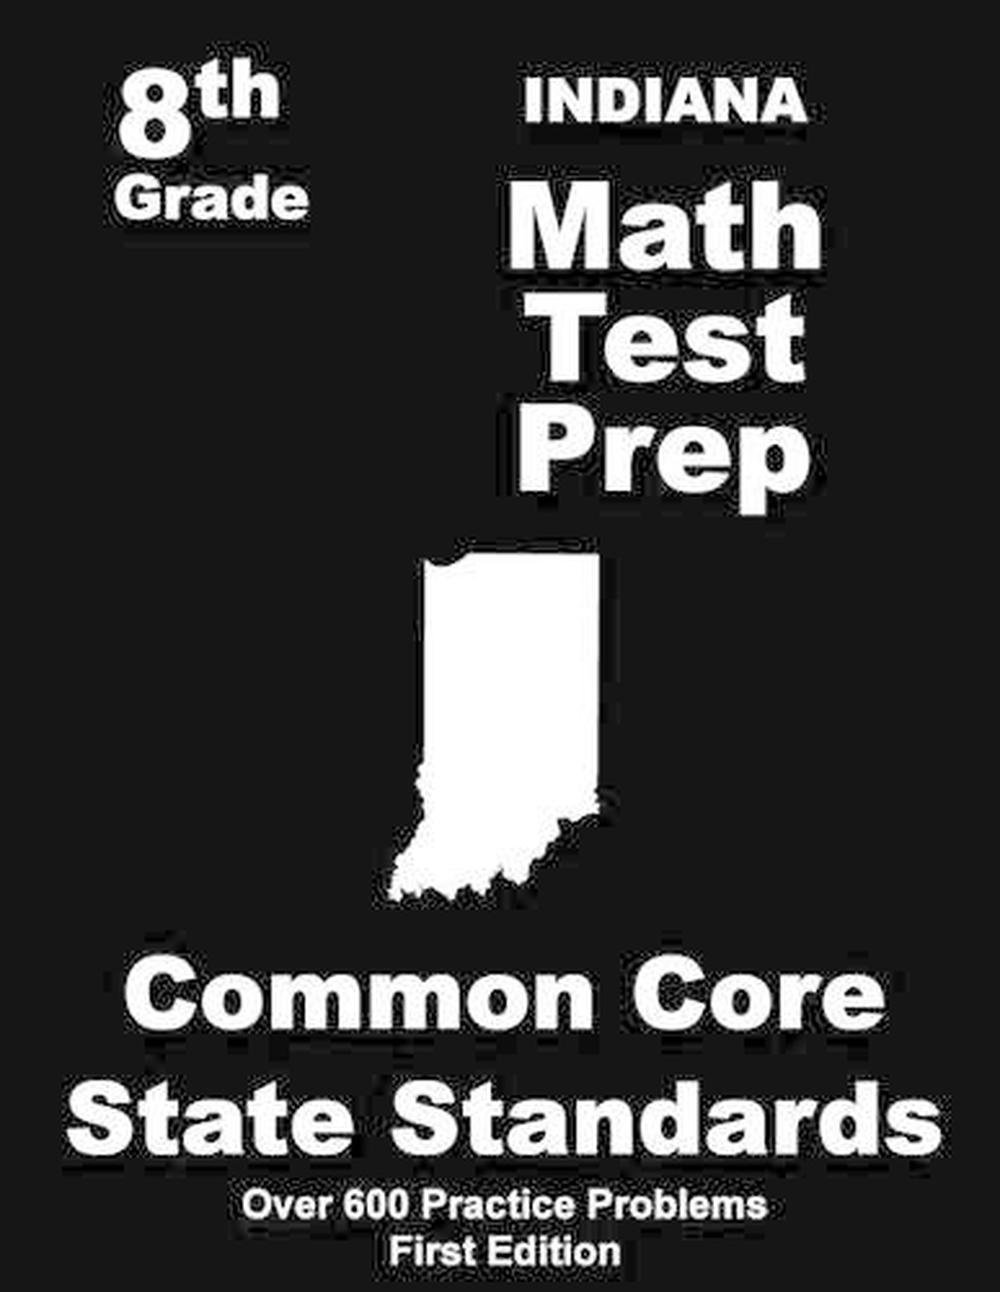 Indiana 8th Grade Math Test Prep Common Core Learning Standards by